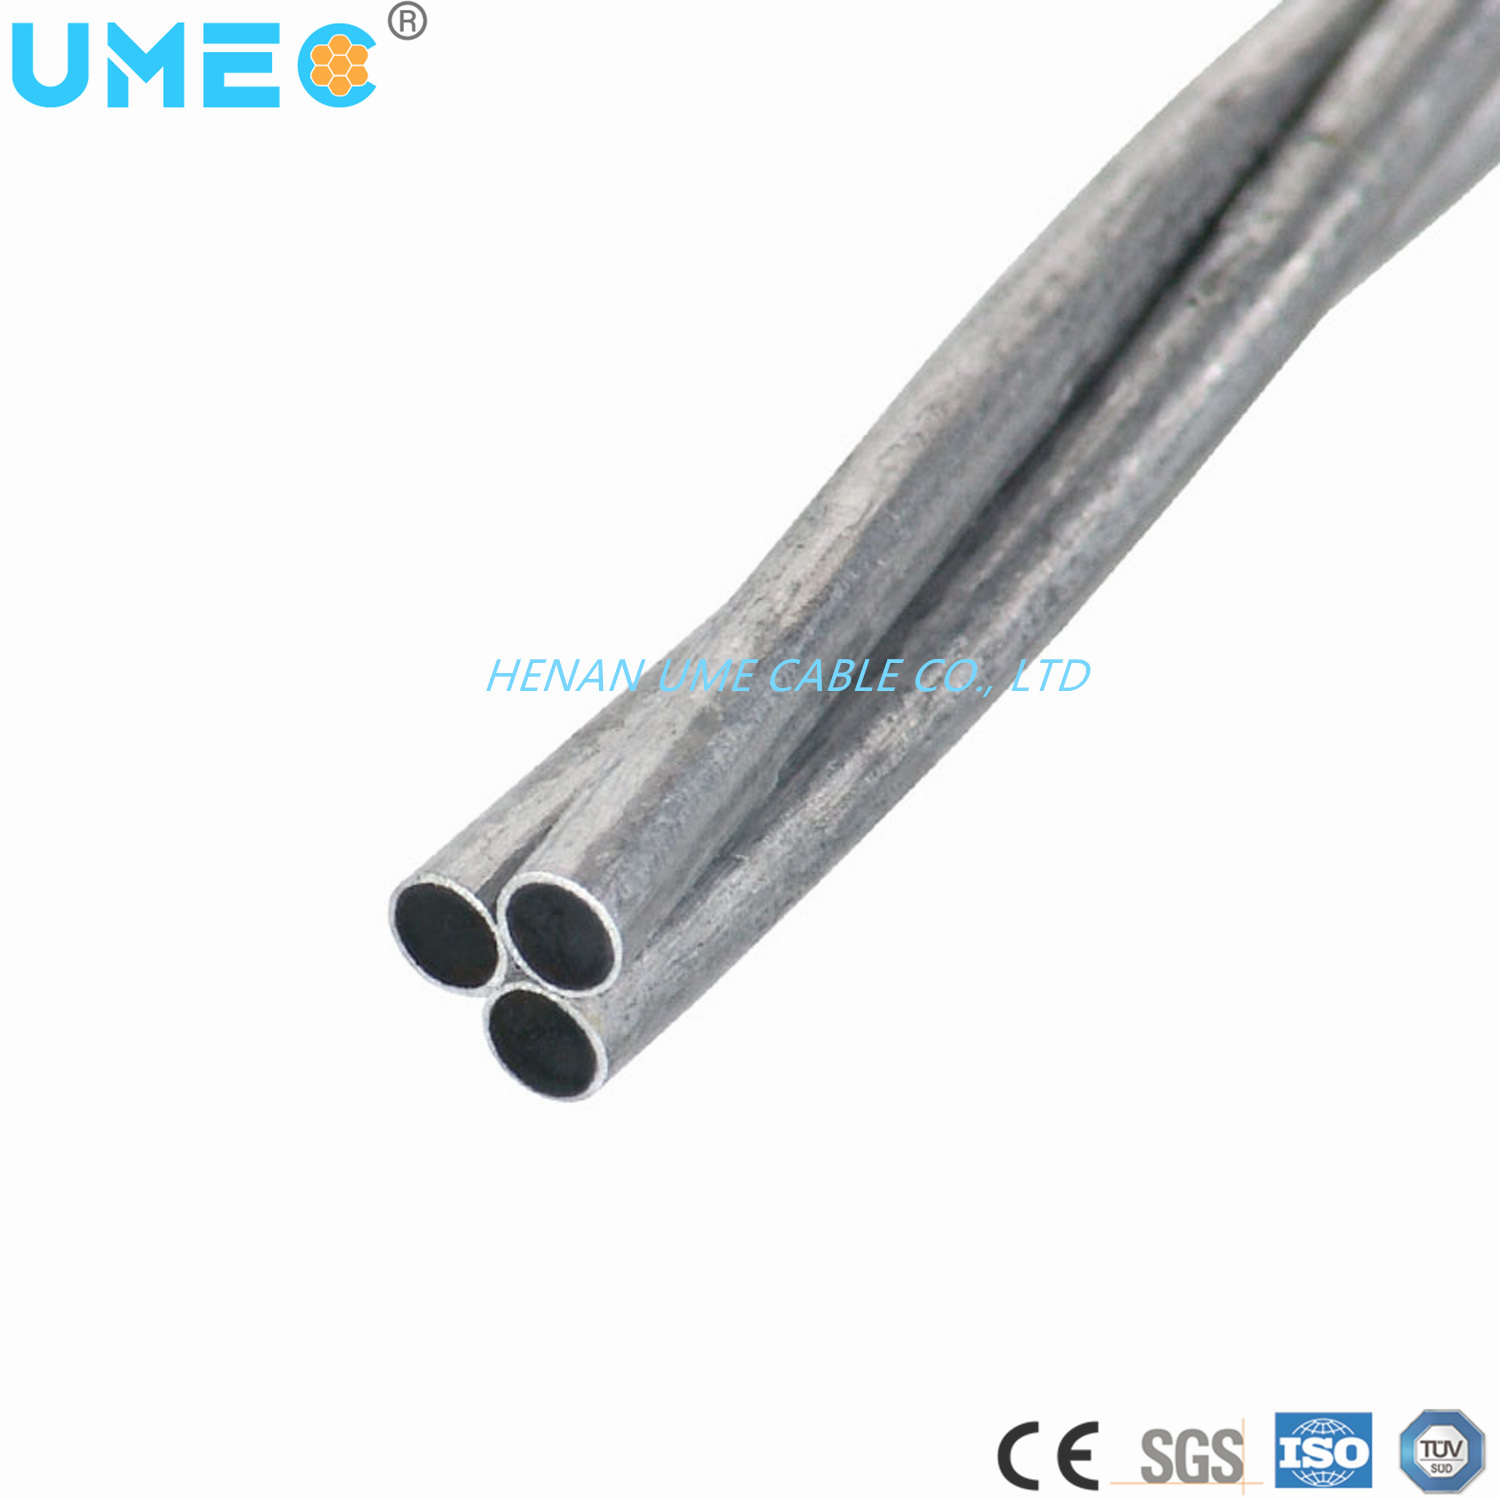 Concentrically Stranded and Wrapped Helically Around a Central Wire Aluminum Clad Steel Wire Acs